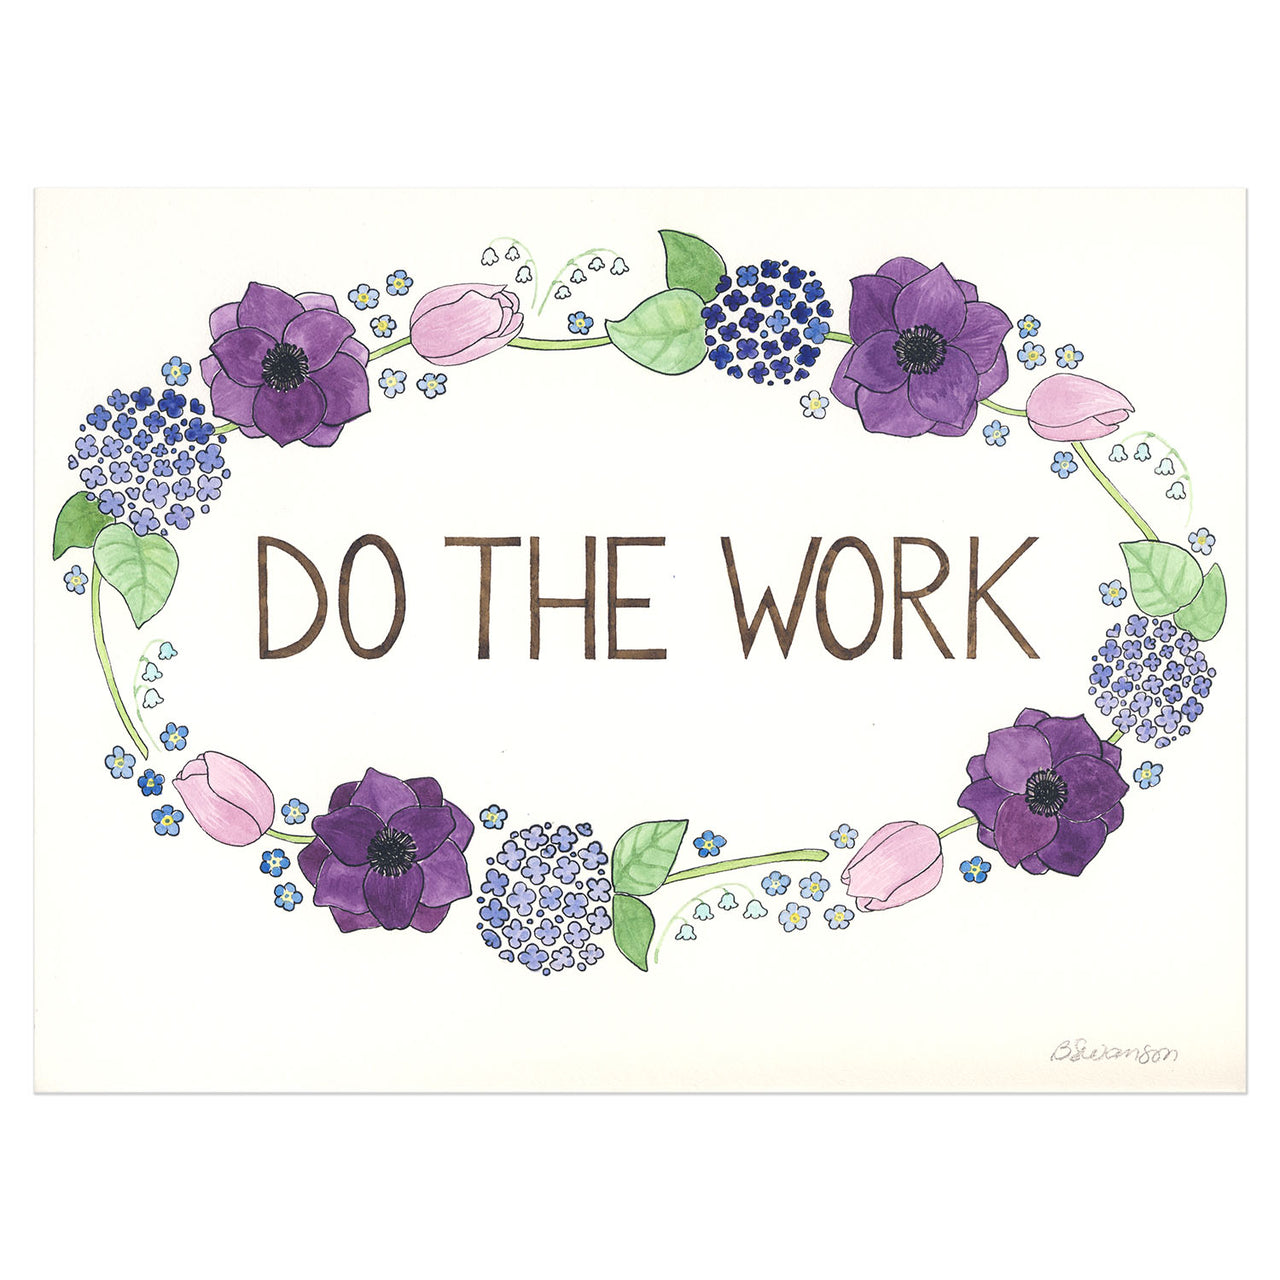 Original watercolor painting of the affirmation Do The Work surrounded by a garland of flowers.